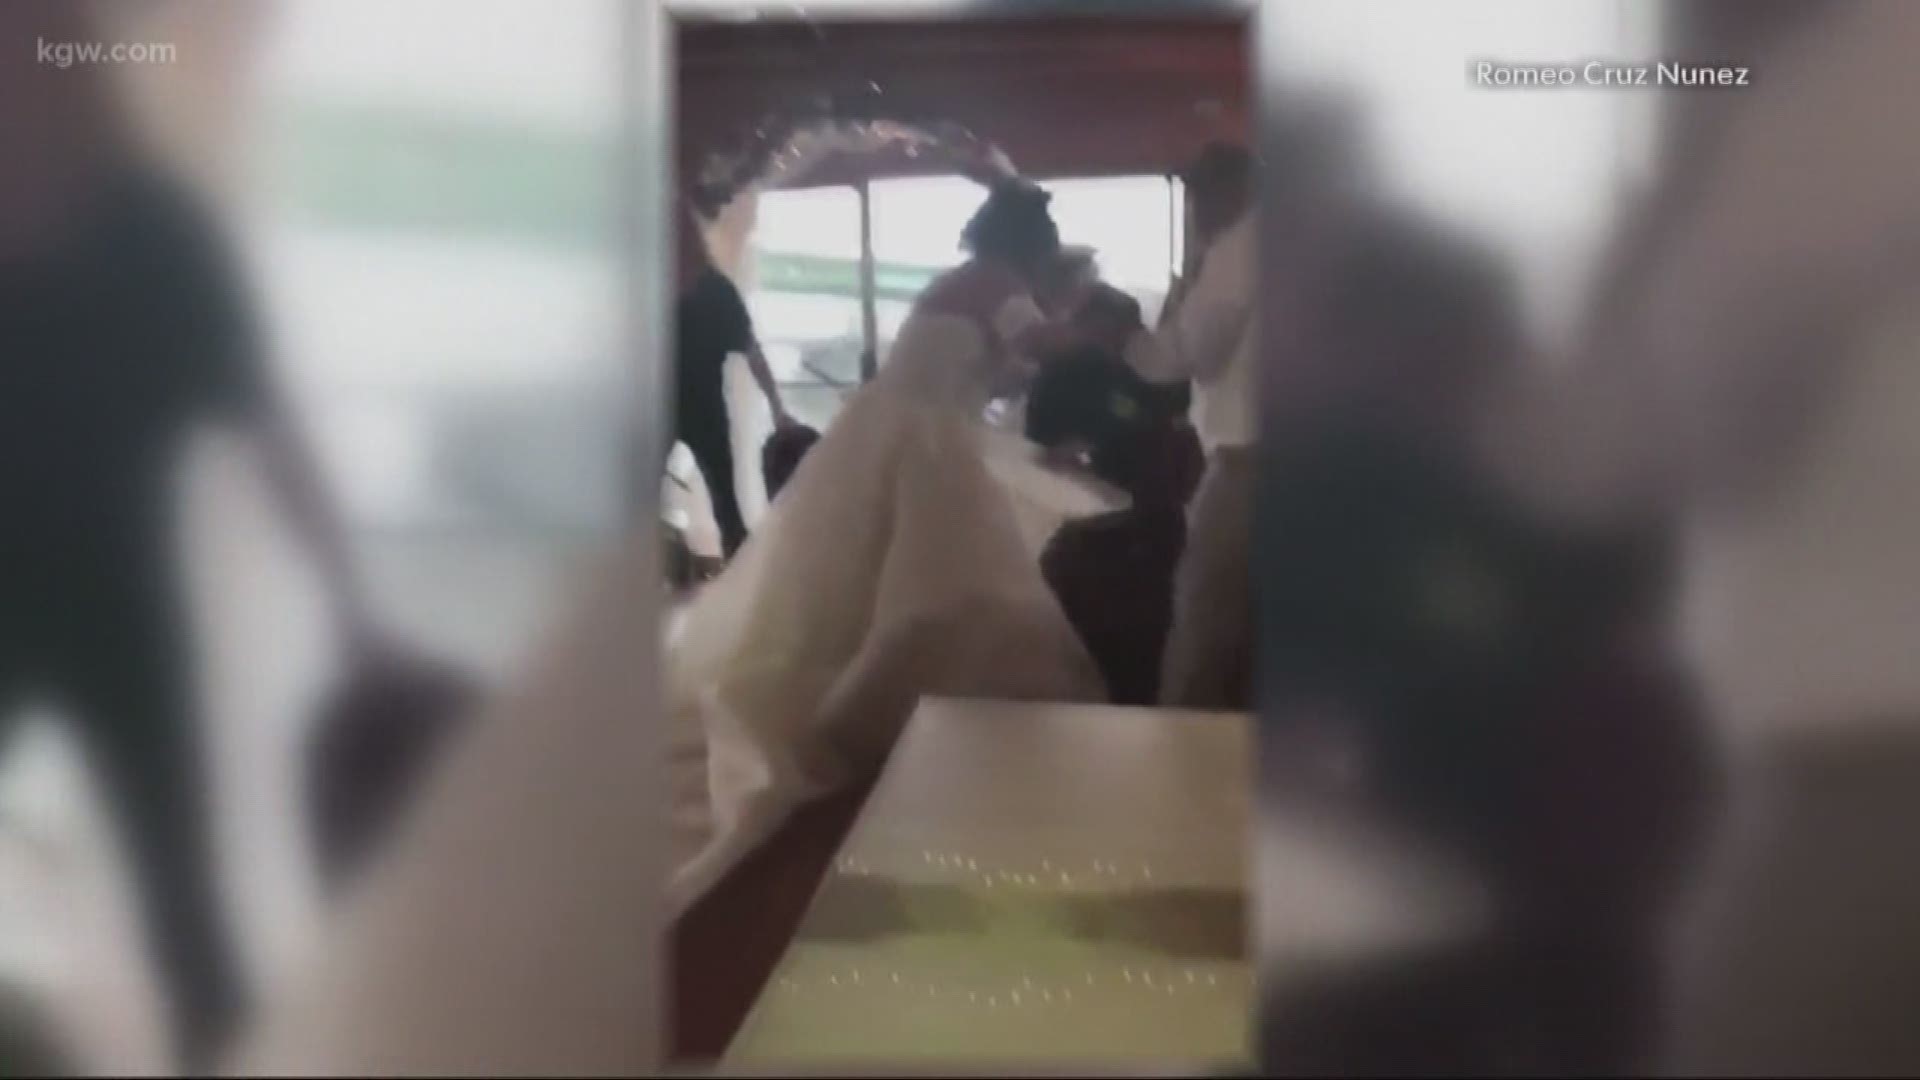 A Salem couple’s romantic wedding on a boat suddenly turned into a frightening situation. Fortunately, nobody was seriously injured.